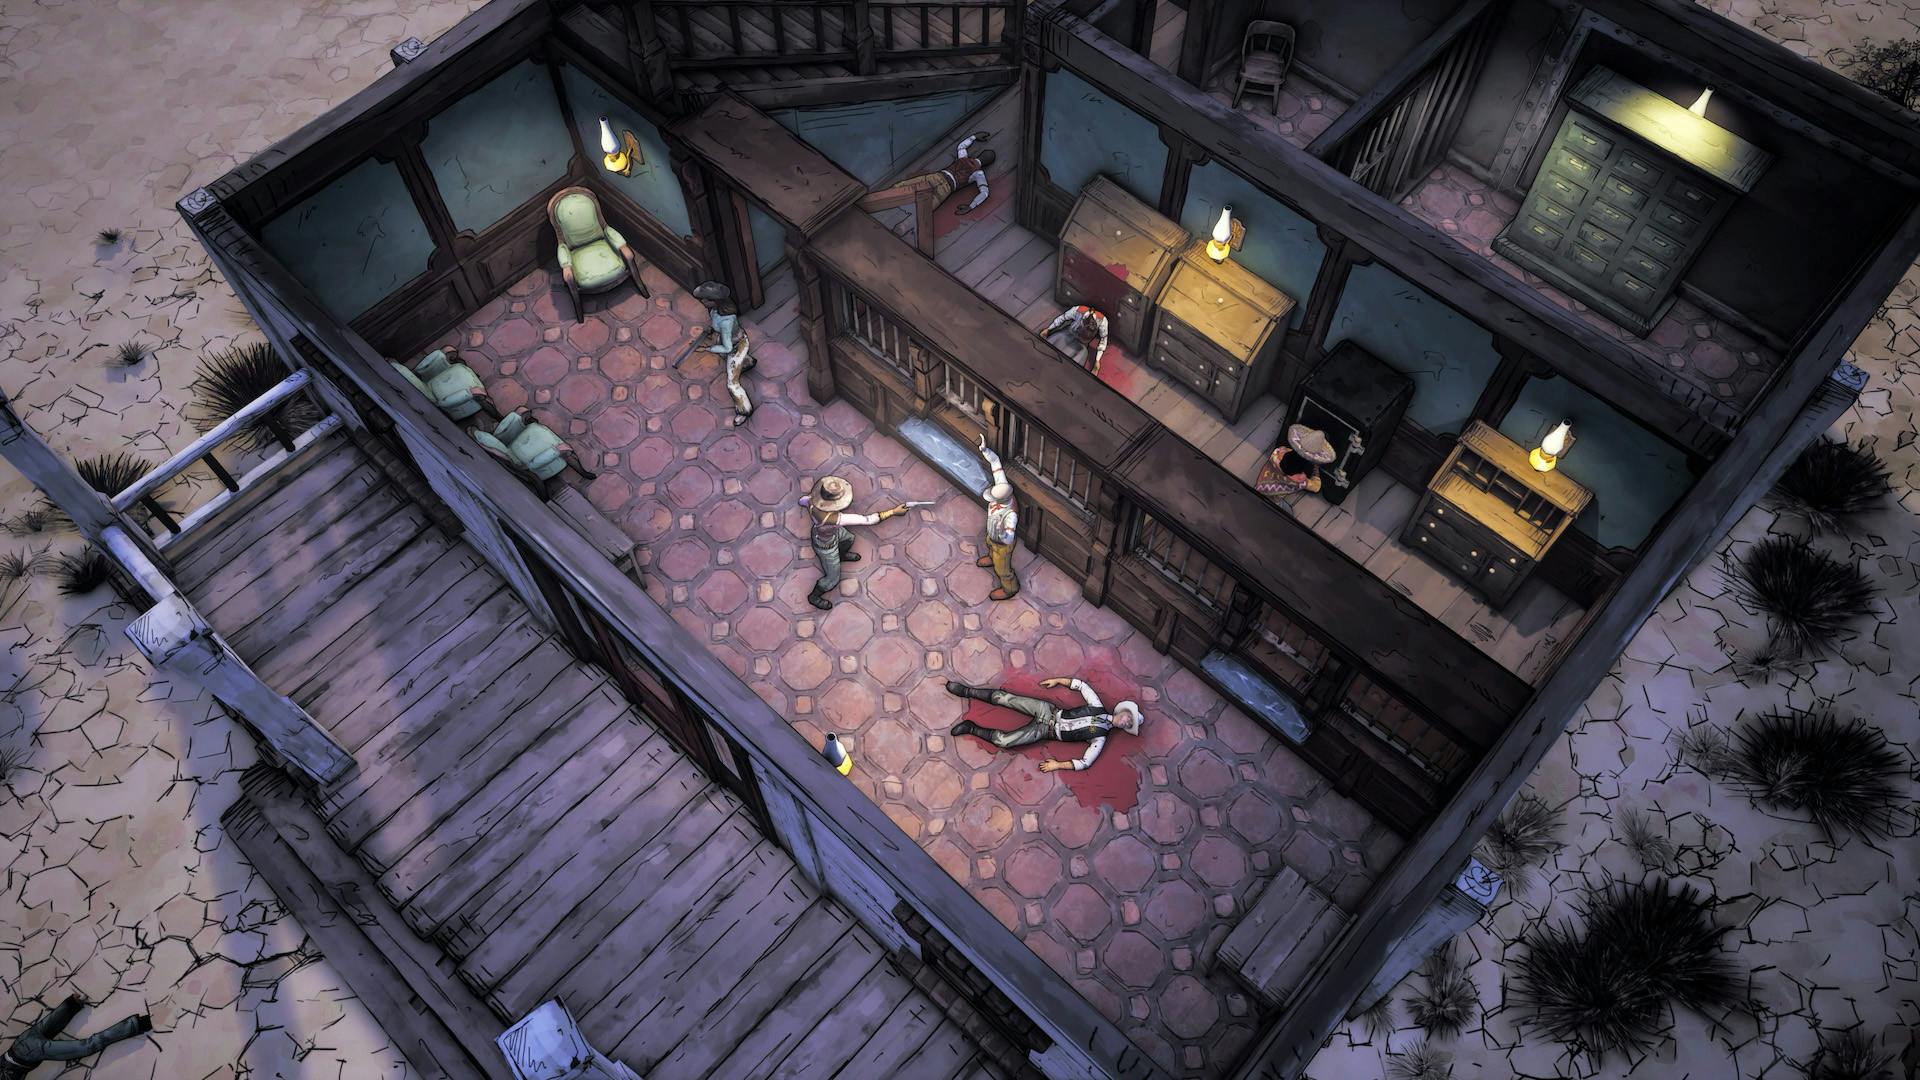 Top down shot of the interior of a house. One person has a gun pointed at another whose hands are raised. Meanwhile a body is on the floor in a pool of blood.